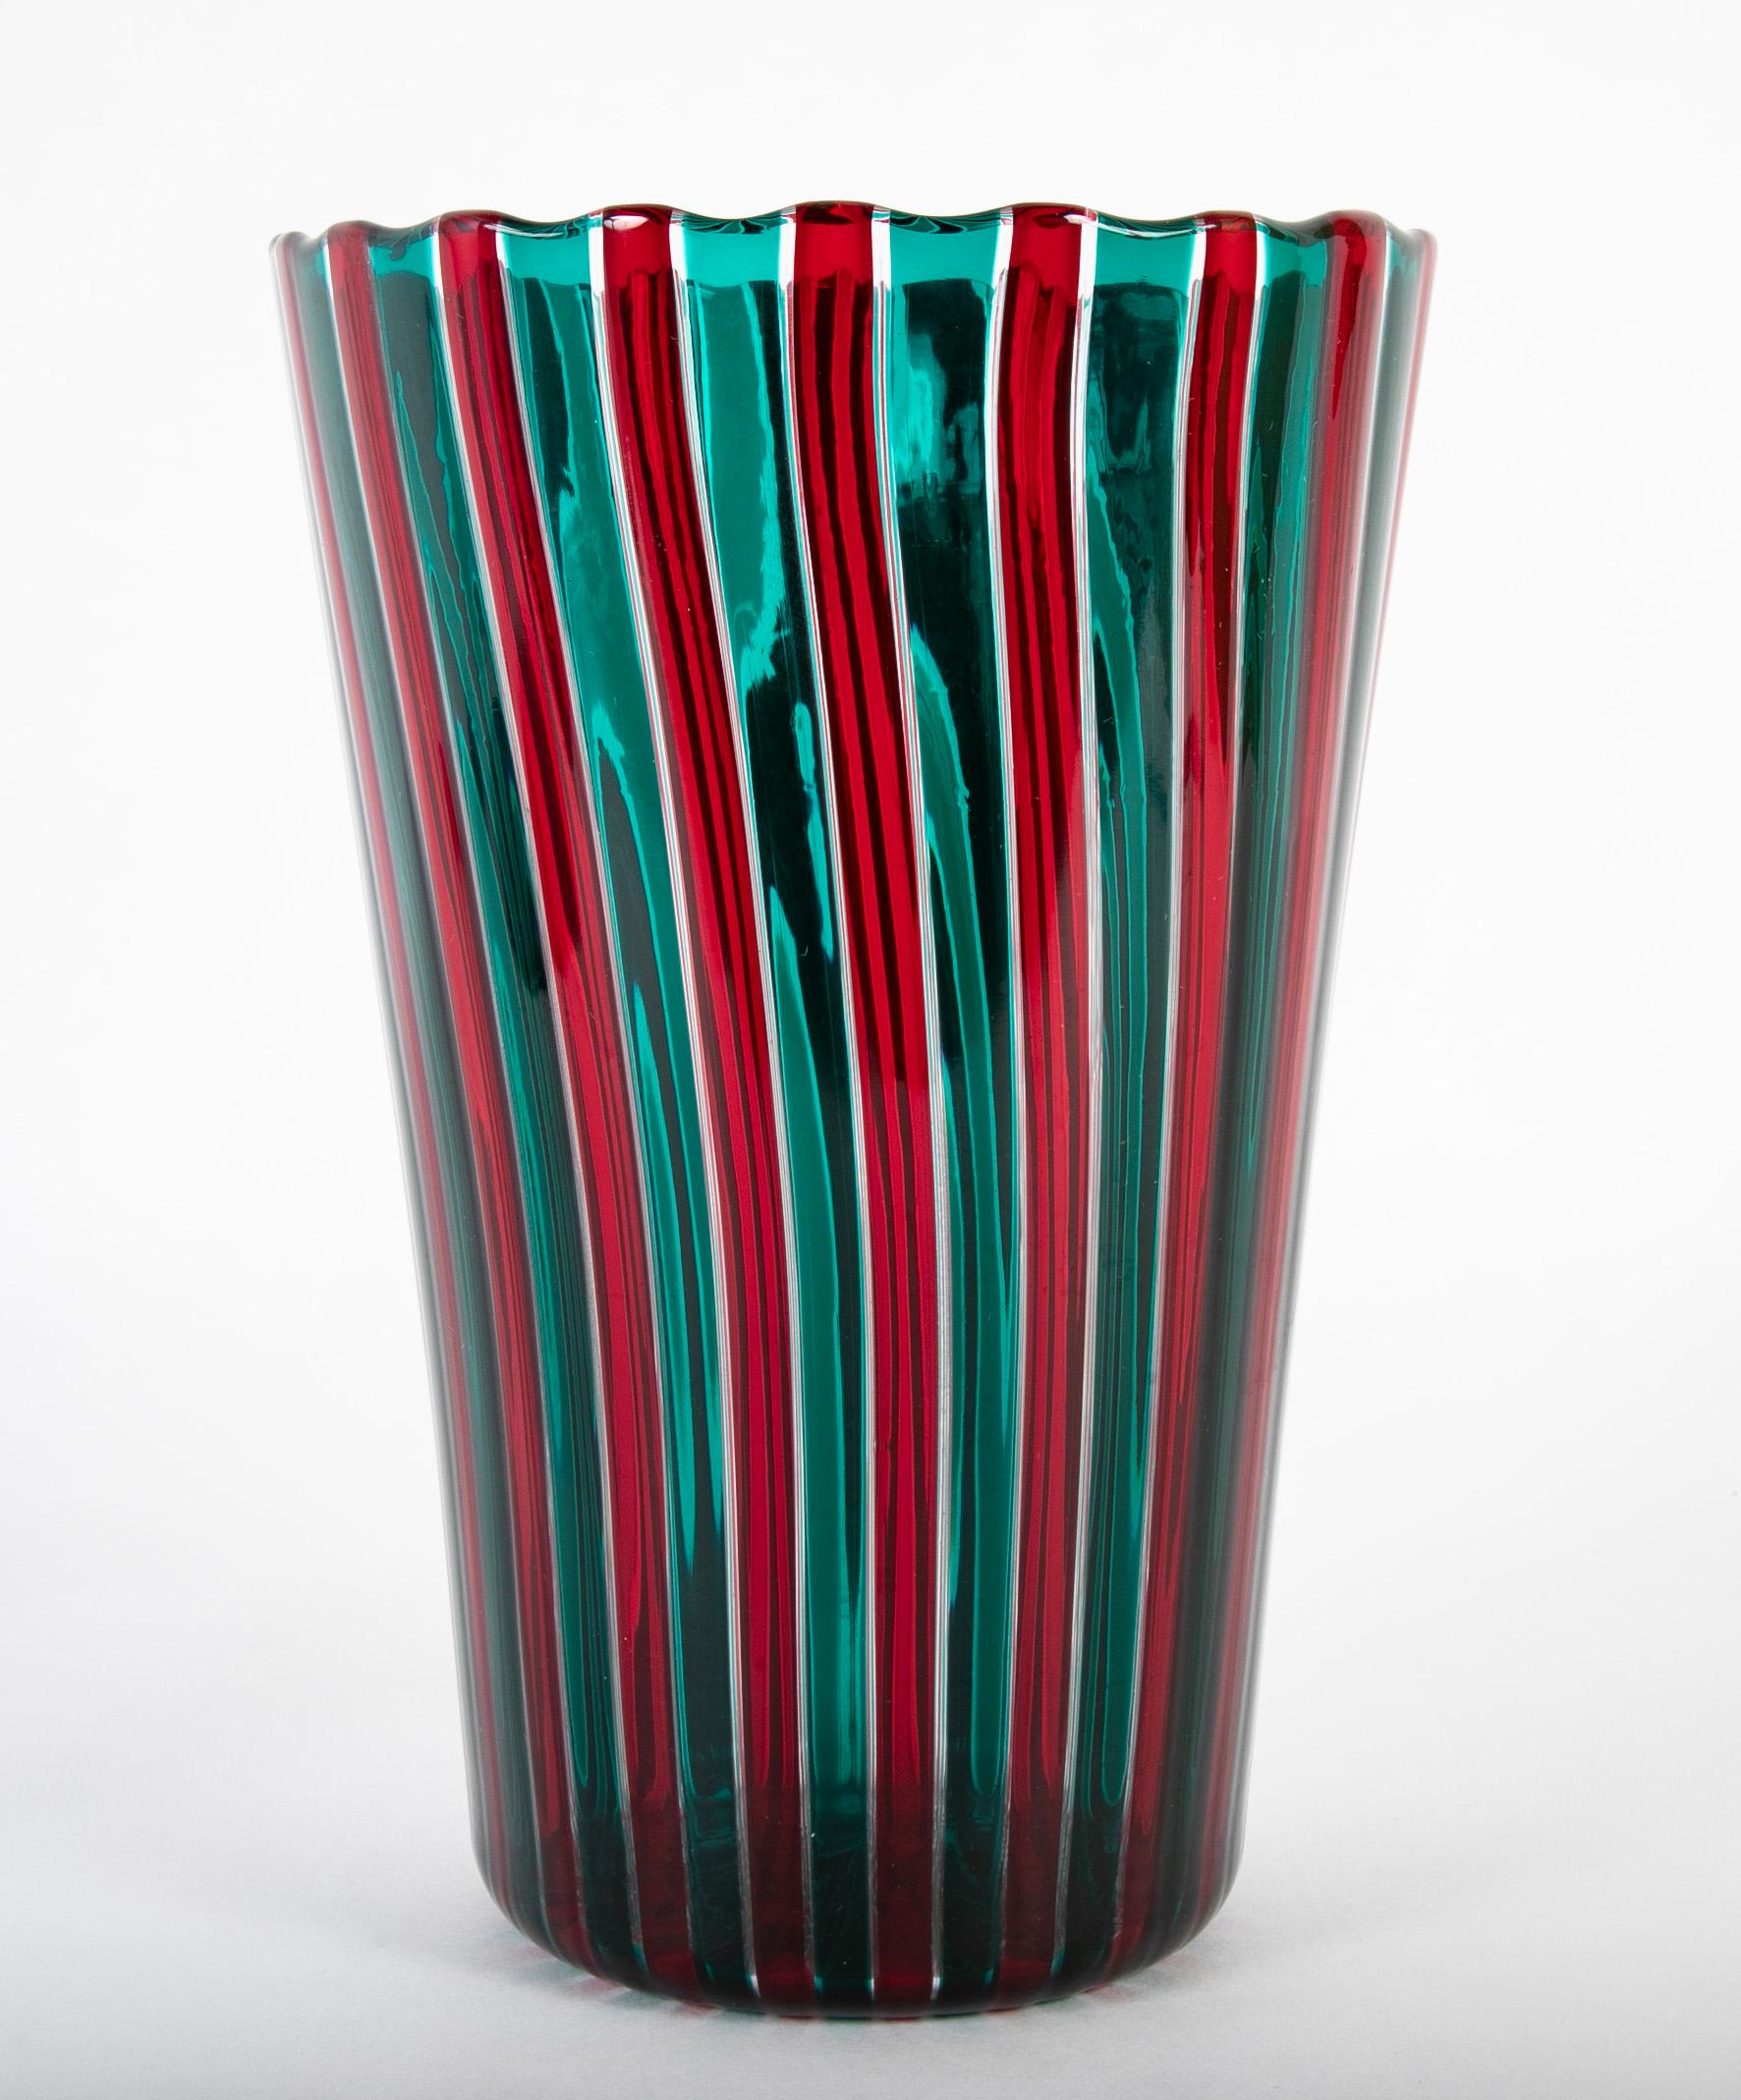 Gio Ponti for Venini red and green 